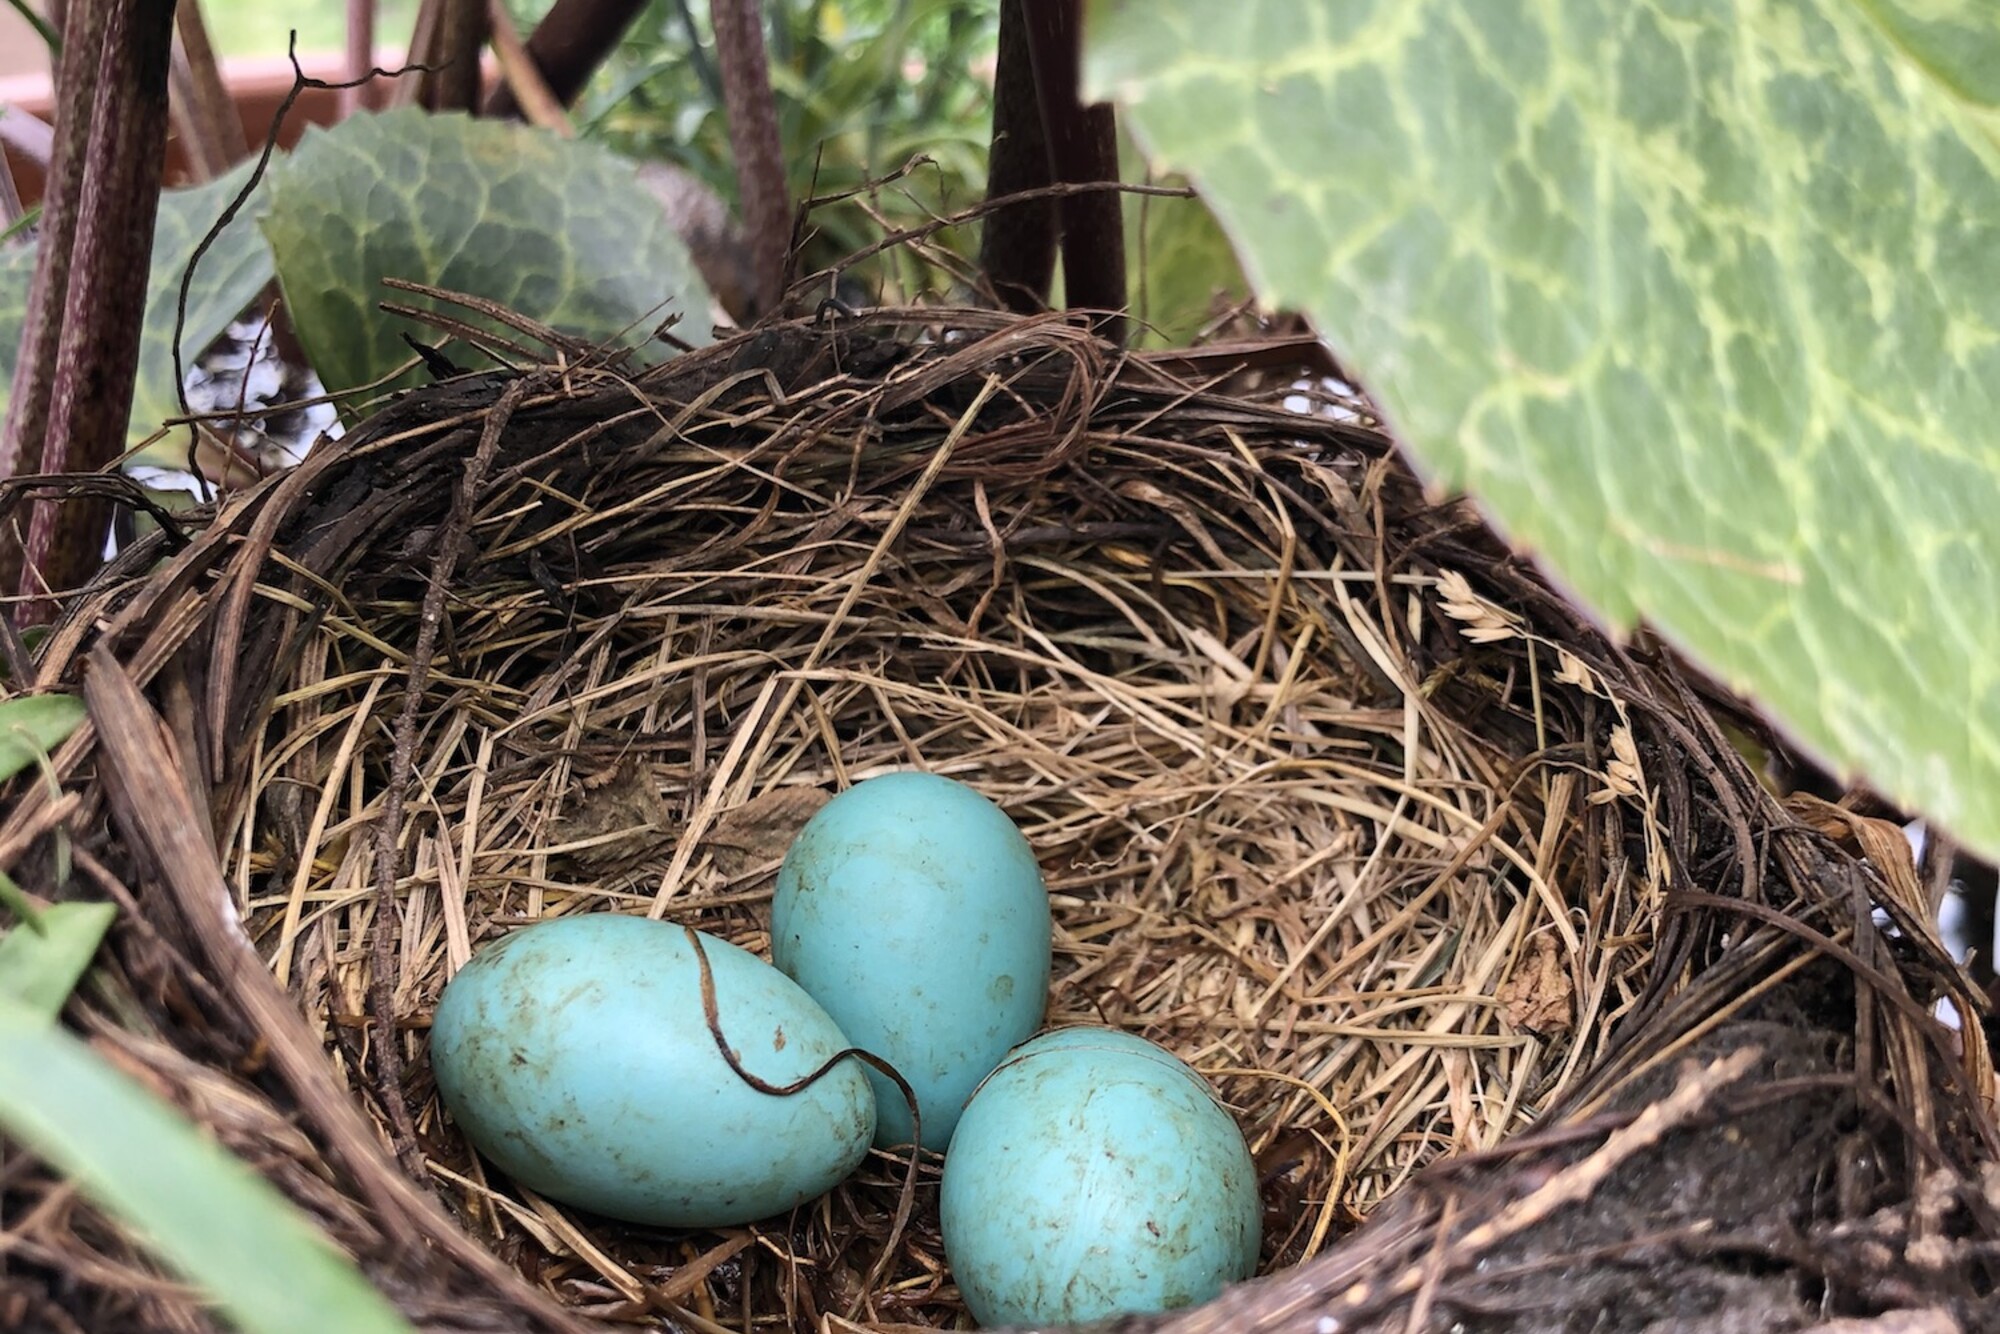 Bird's nest with three blue eggs in a potted plant